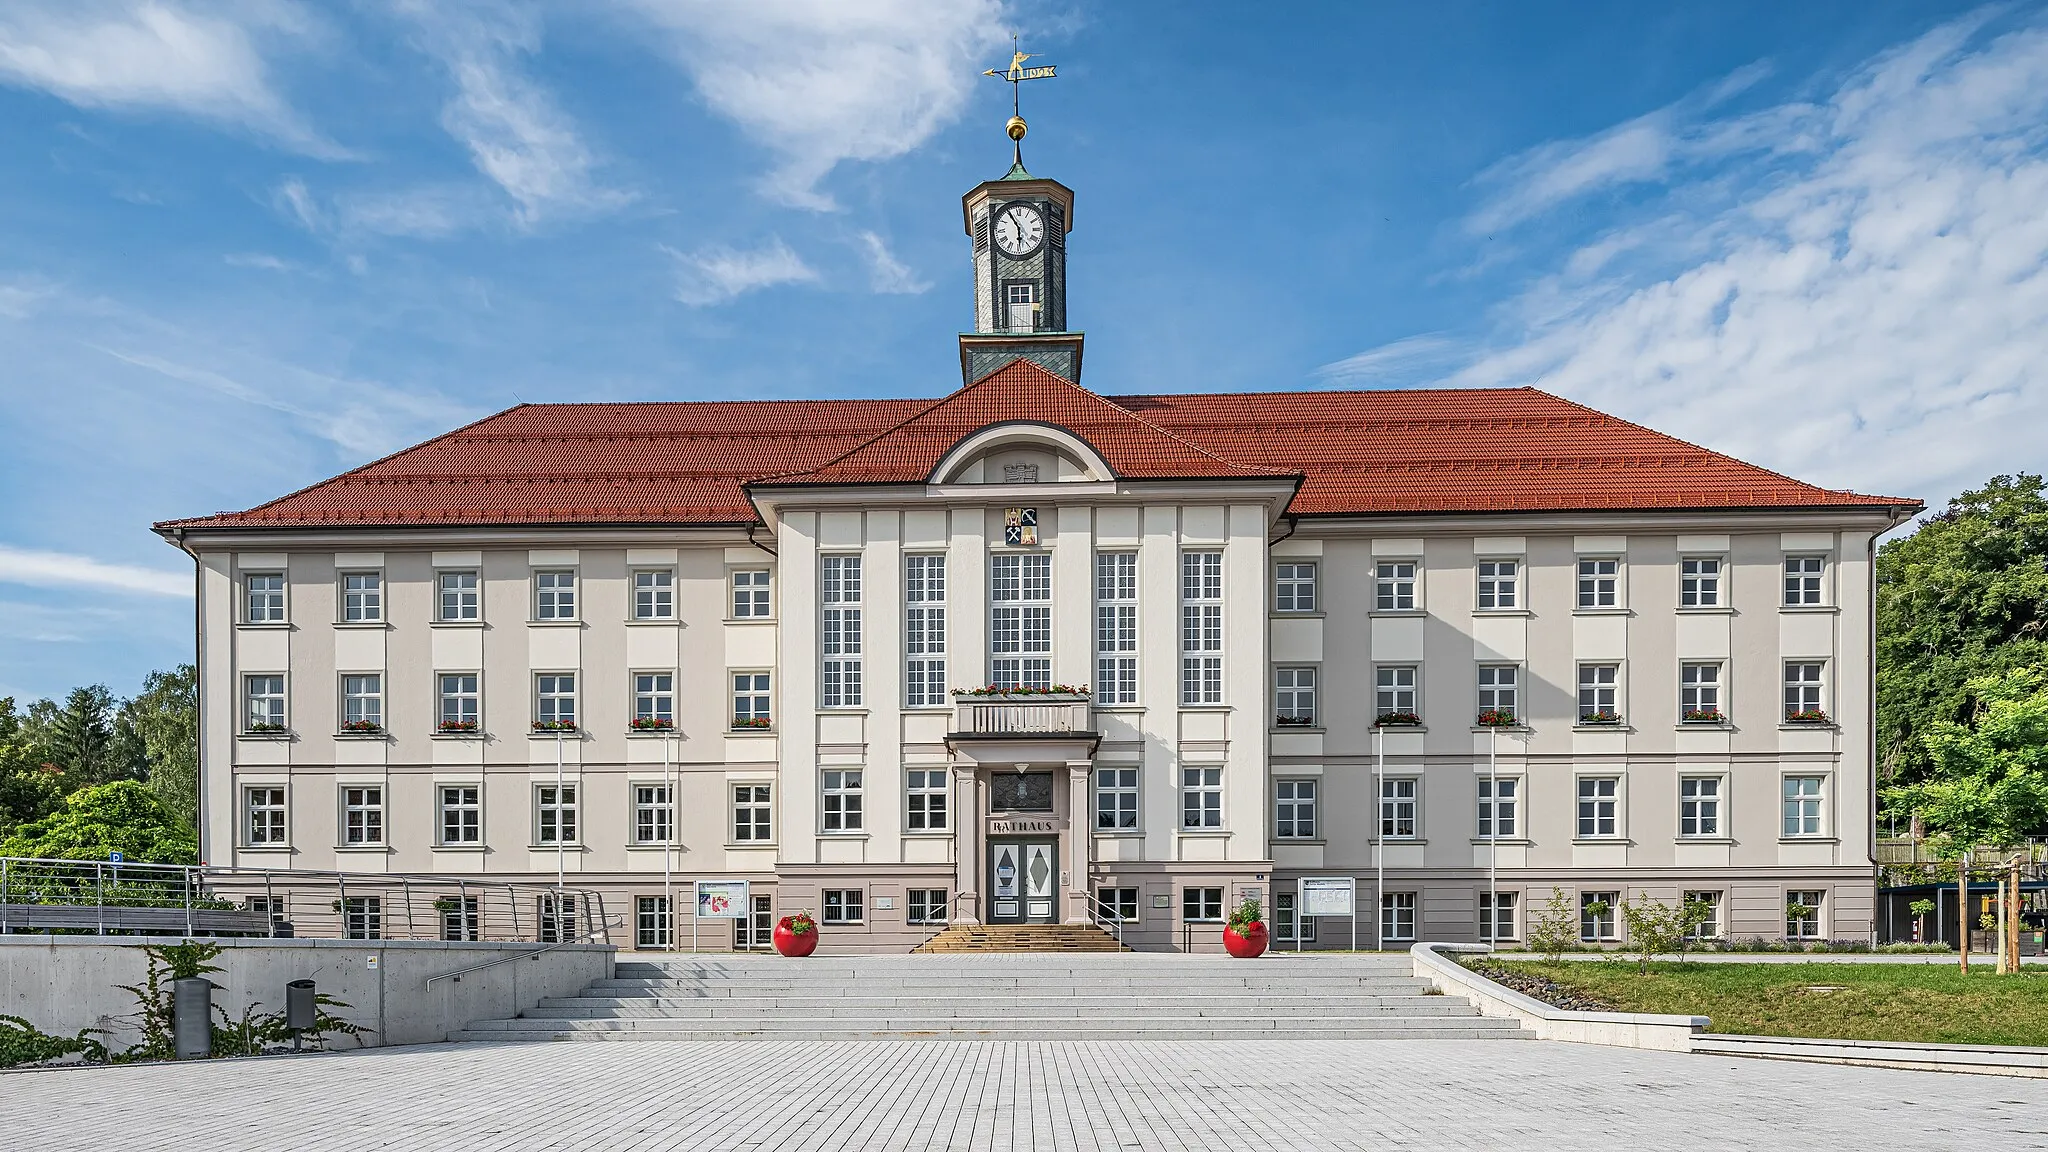 Photo showing: Town hall in Zella-Mehlis, Thuringia, Germany